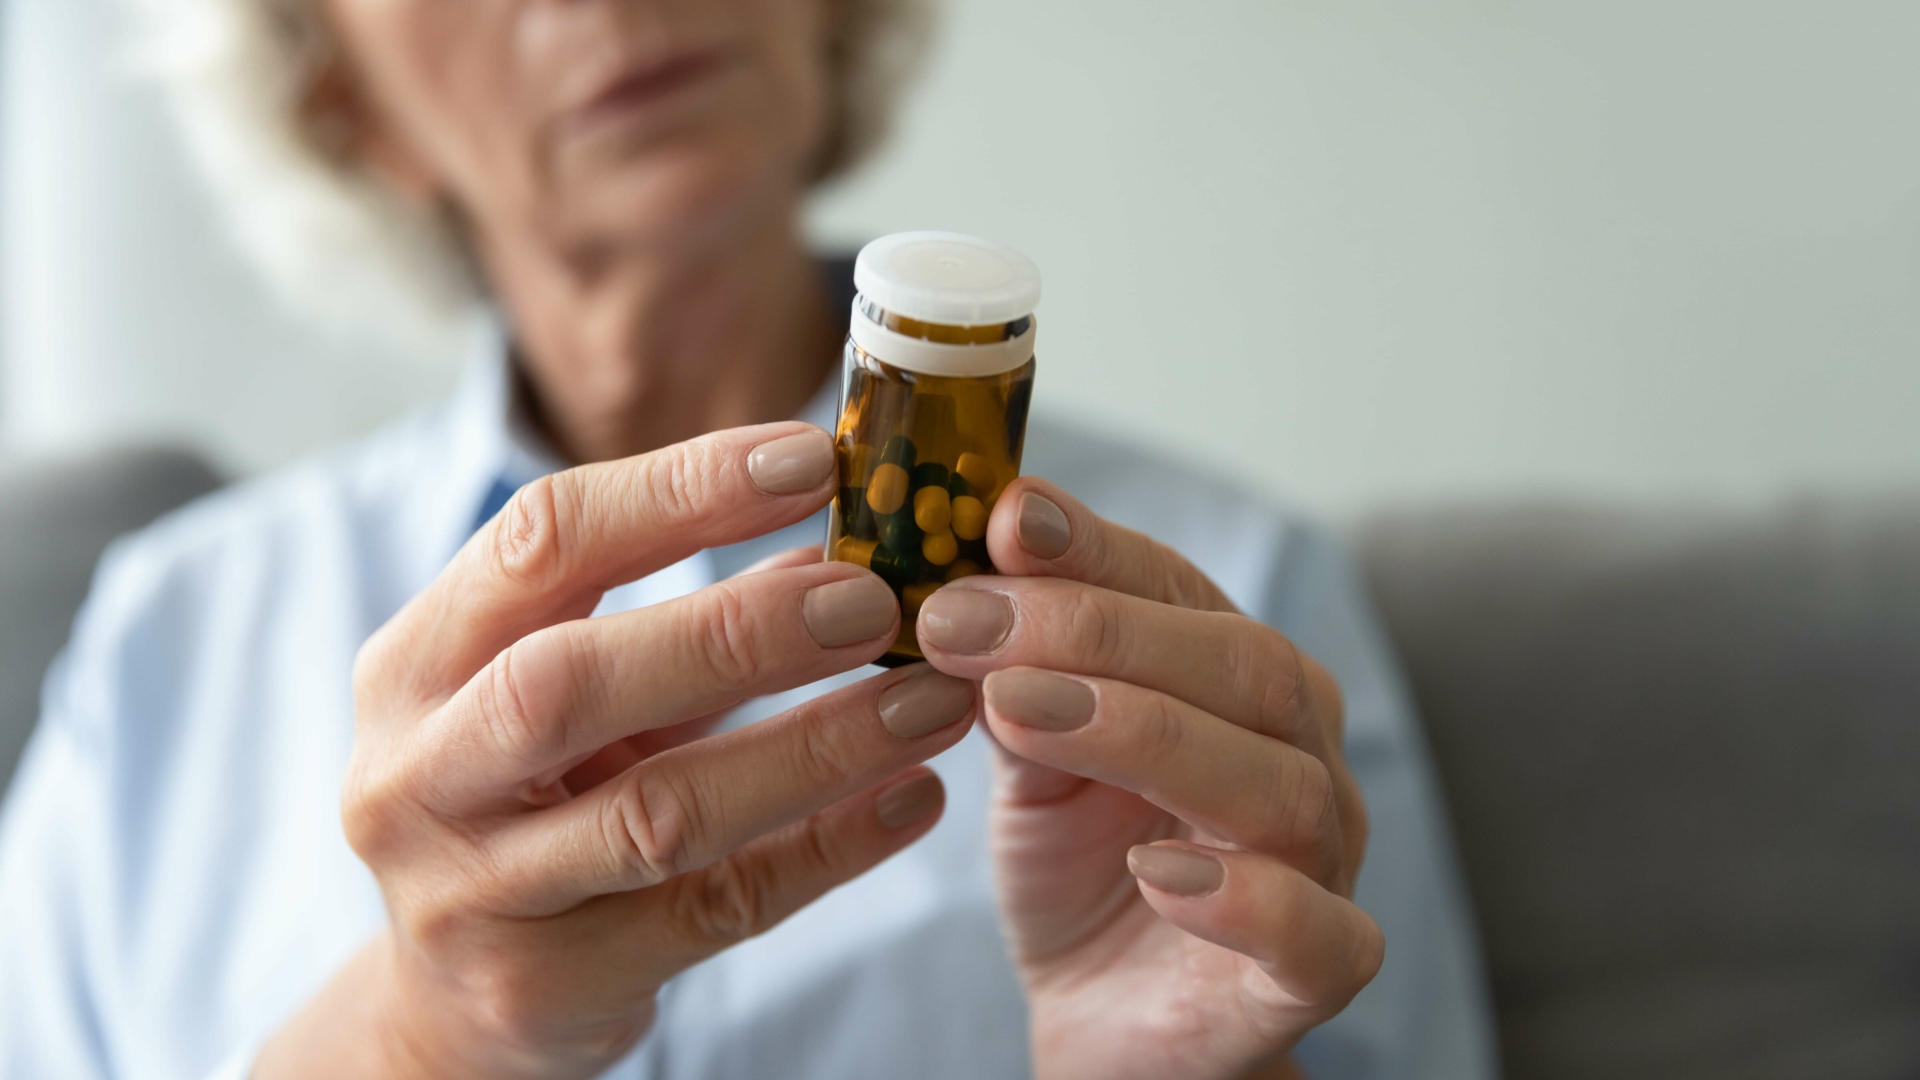 New research shows more than half of aged care residents are on antidepressants